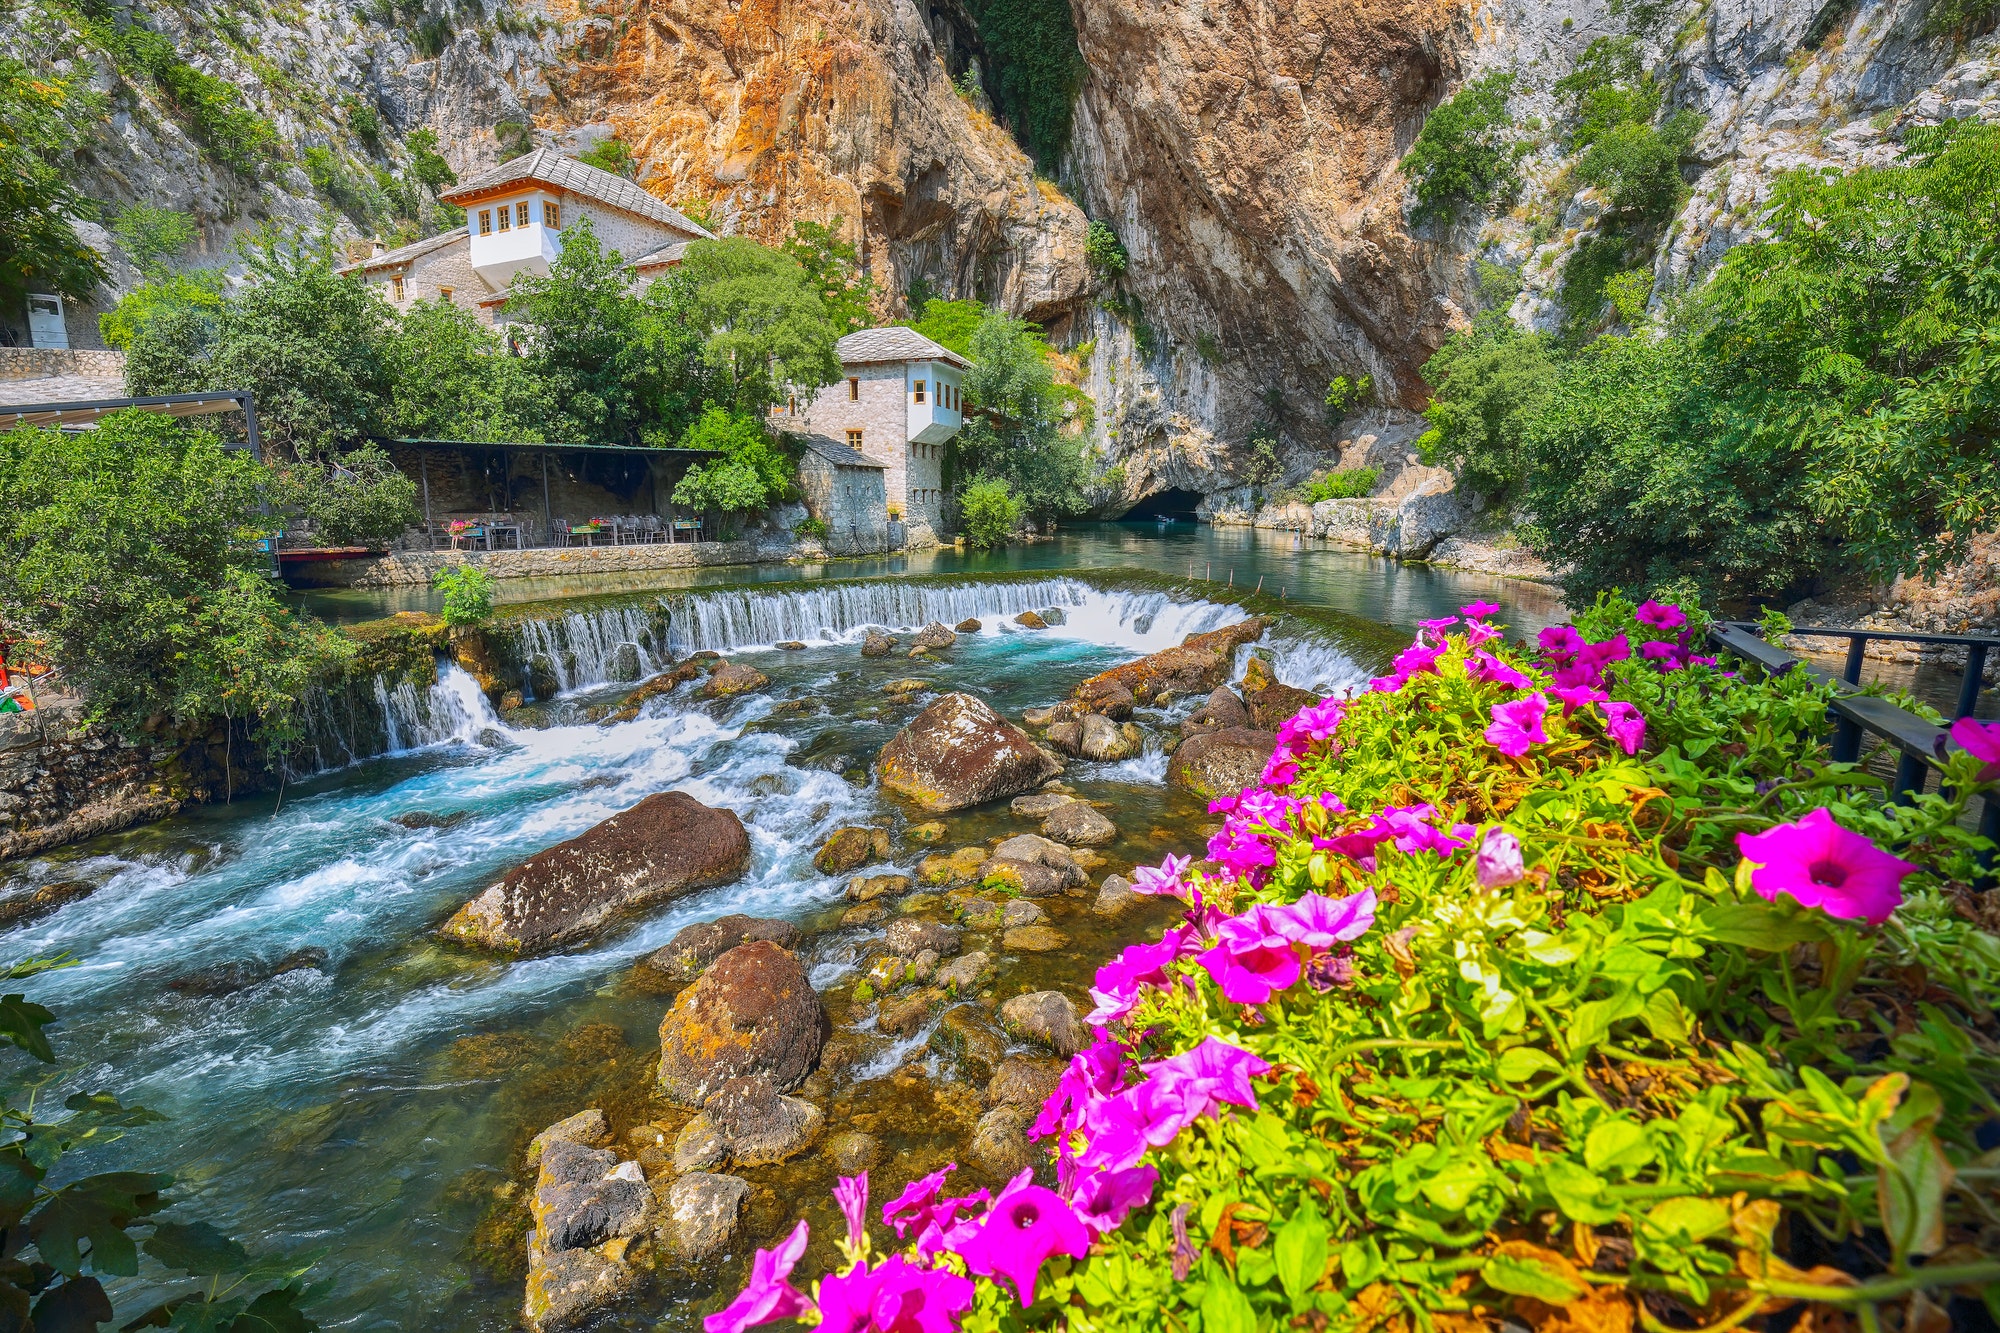 dervish monastery or tekke at the buna river spring in the town of blagaj